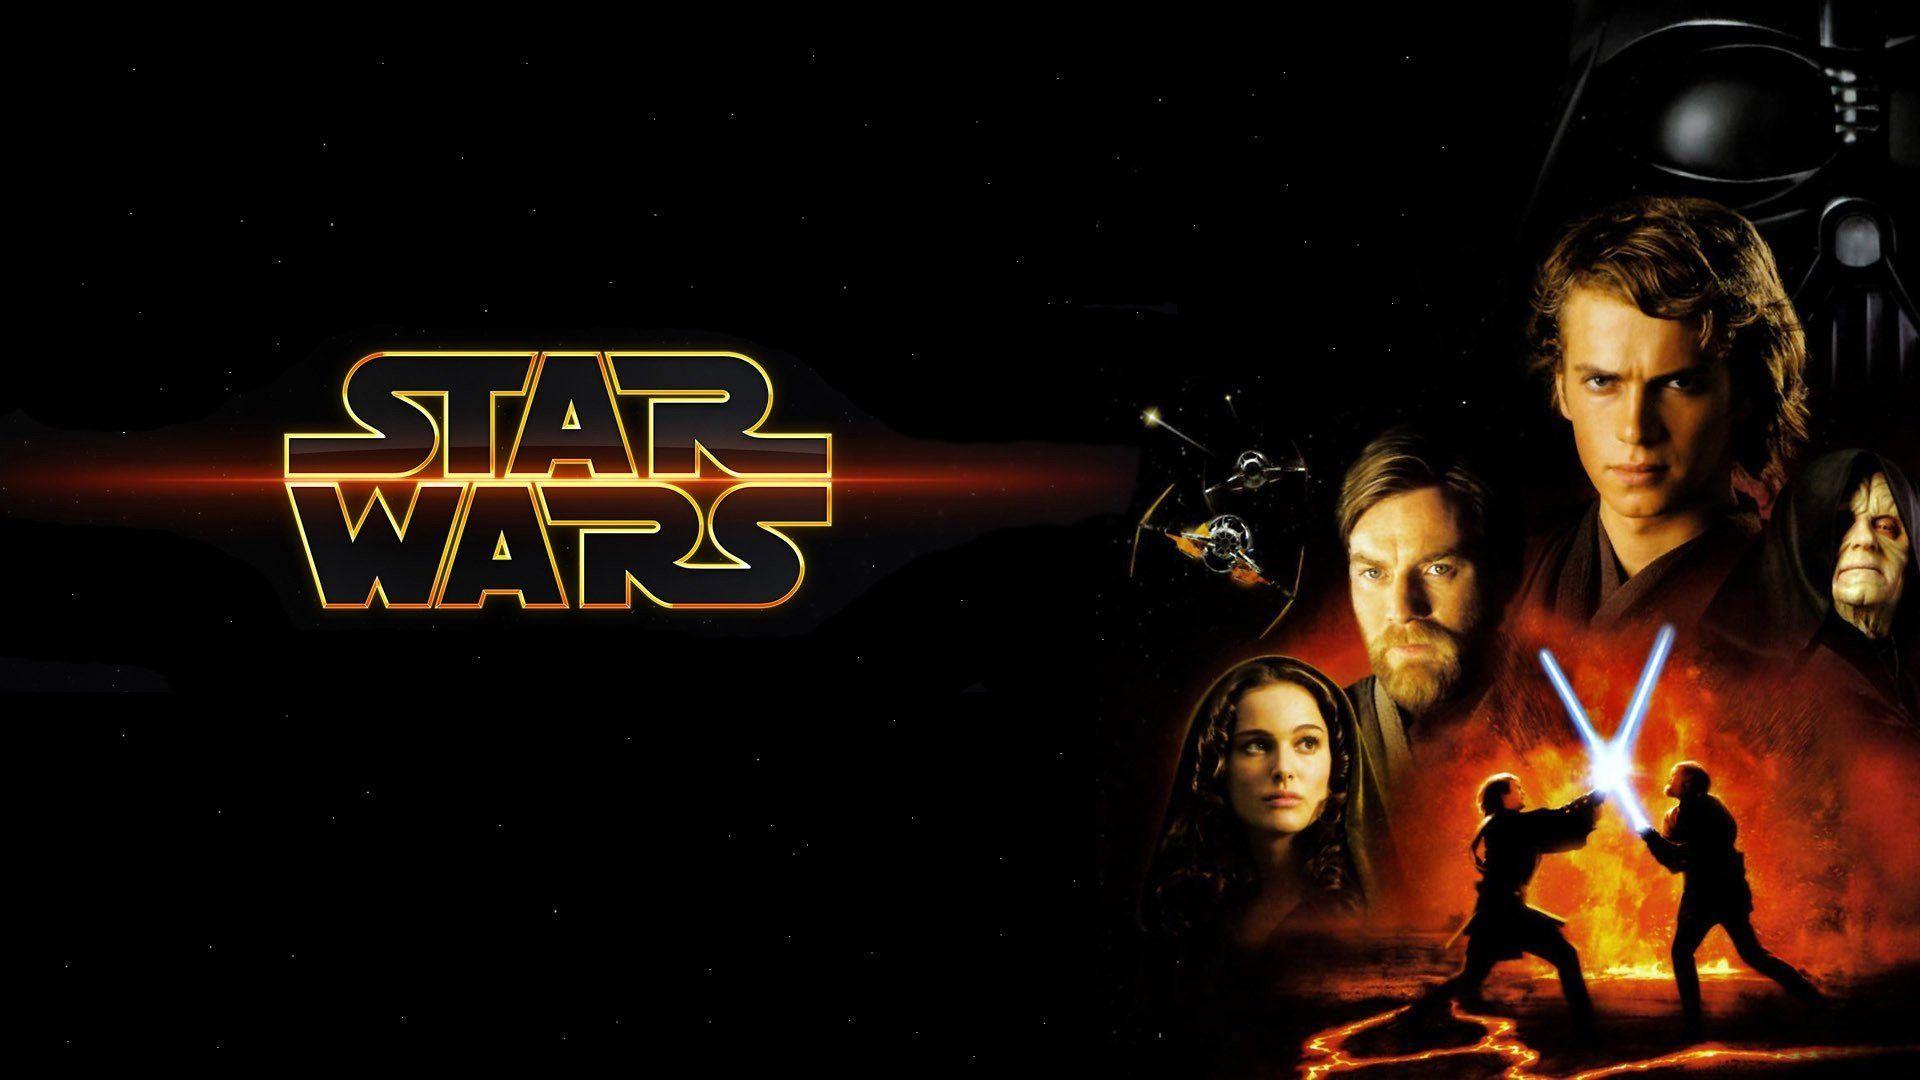 Star Wars Ep. III: Revenge of the Sith for apple download